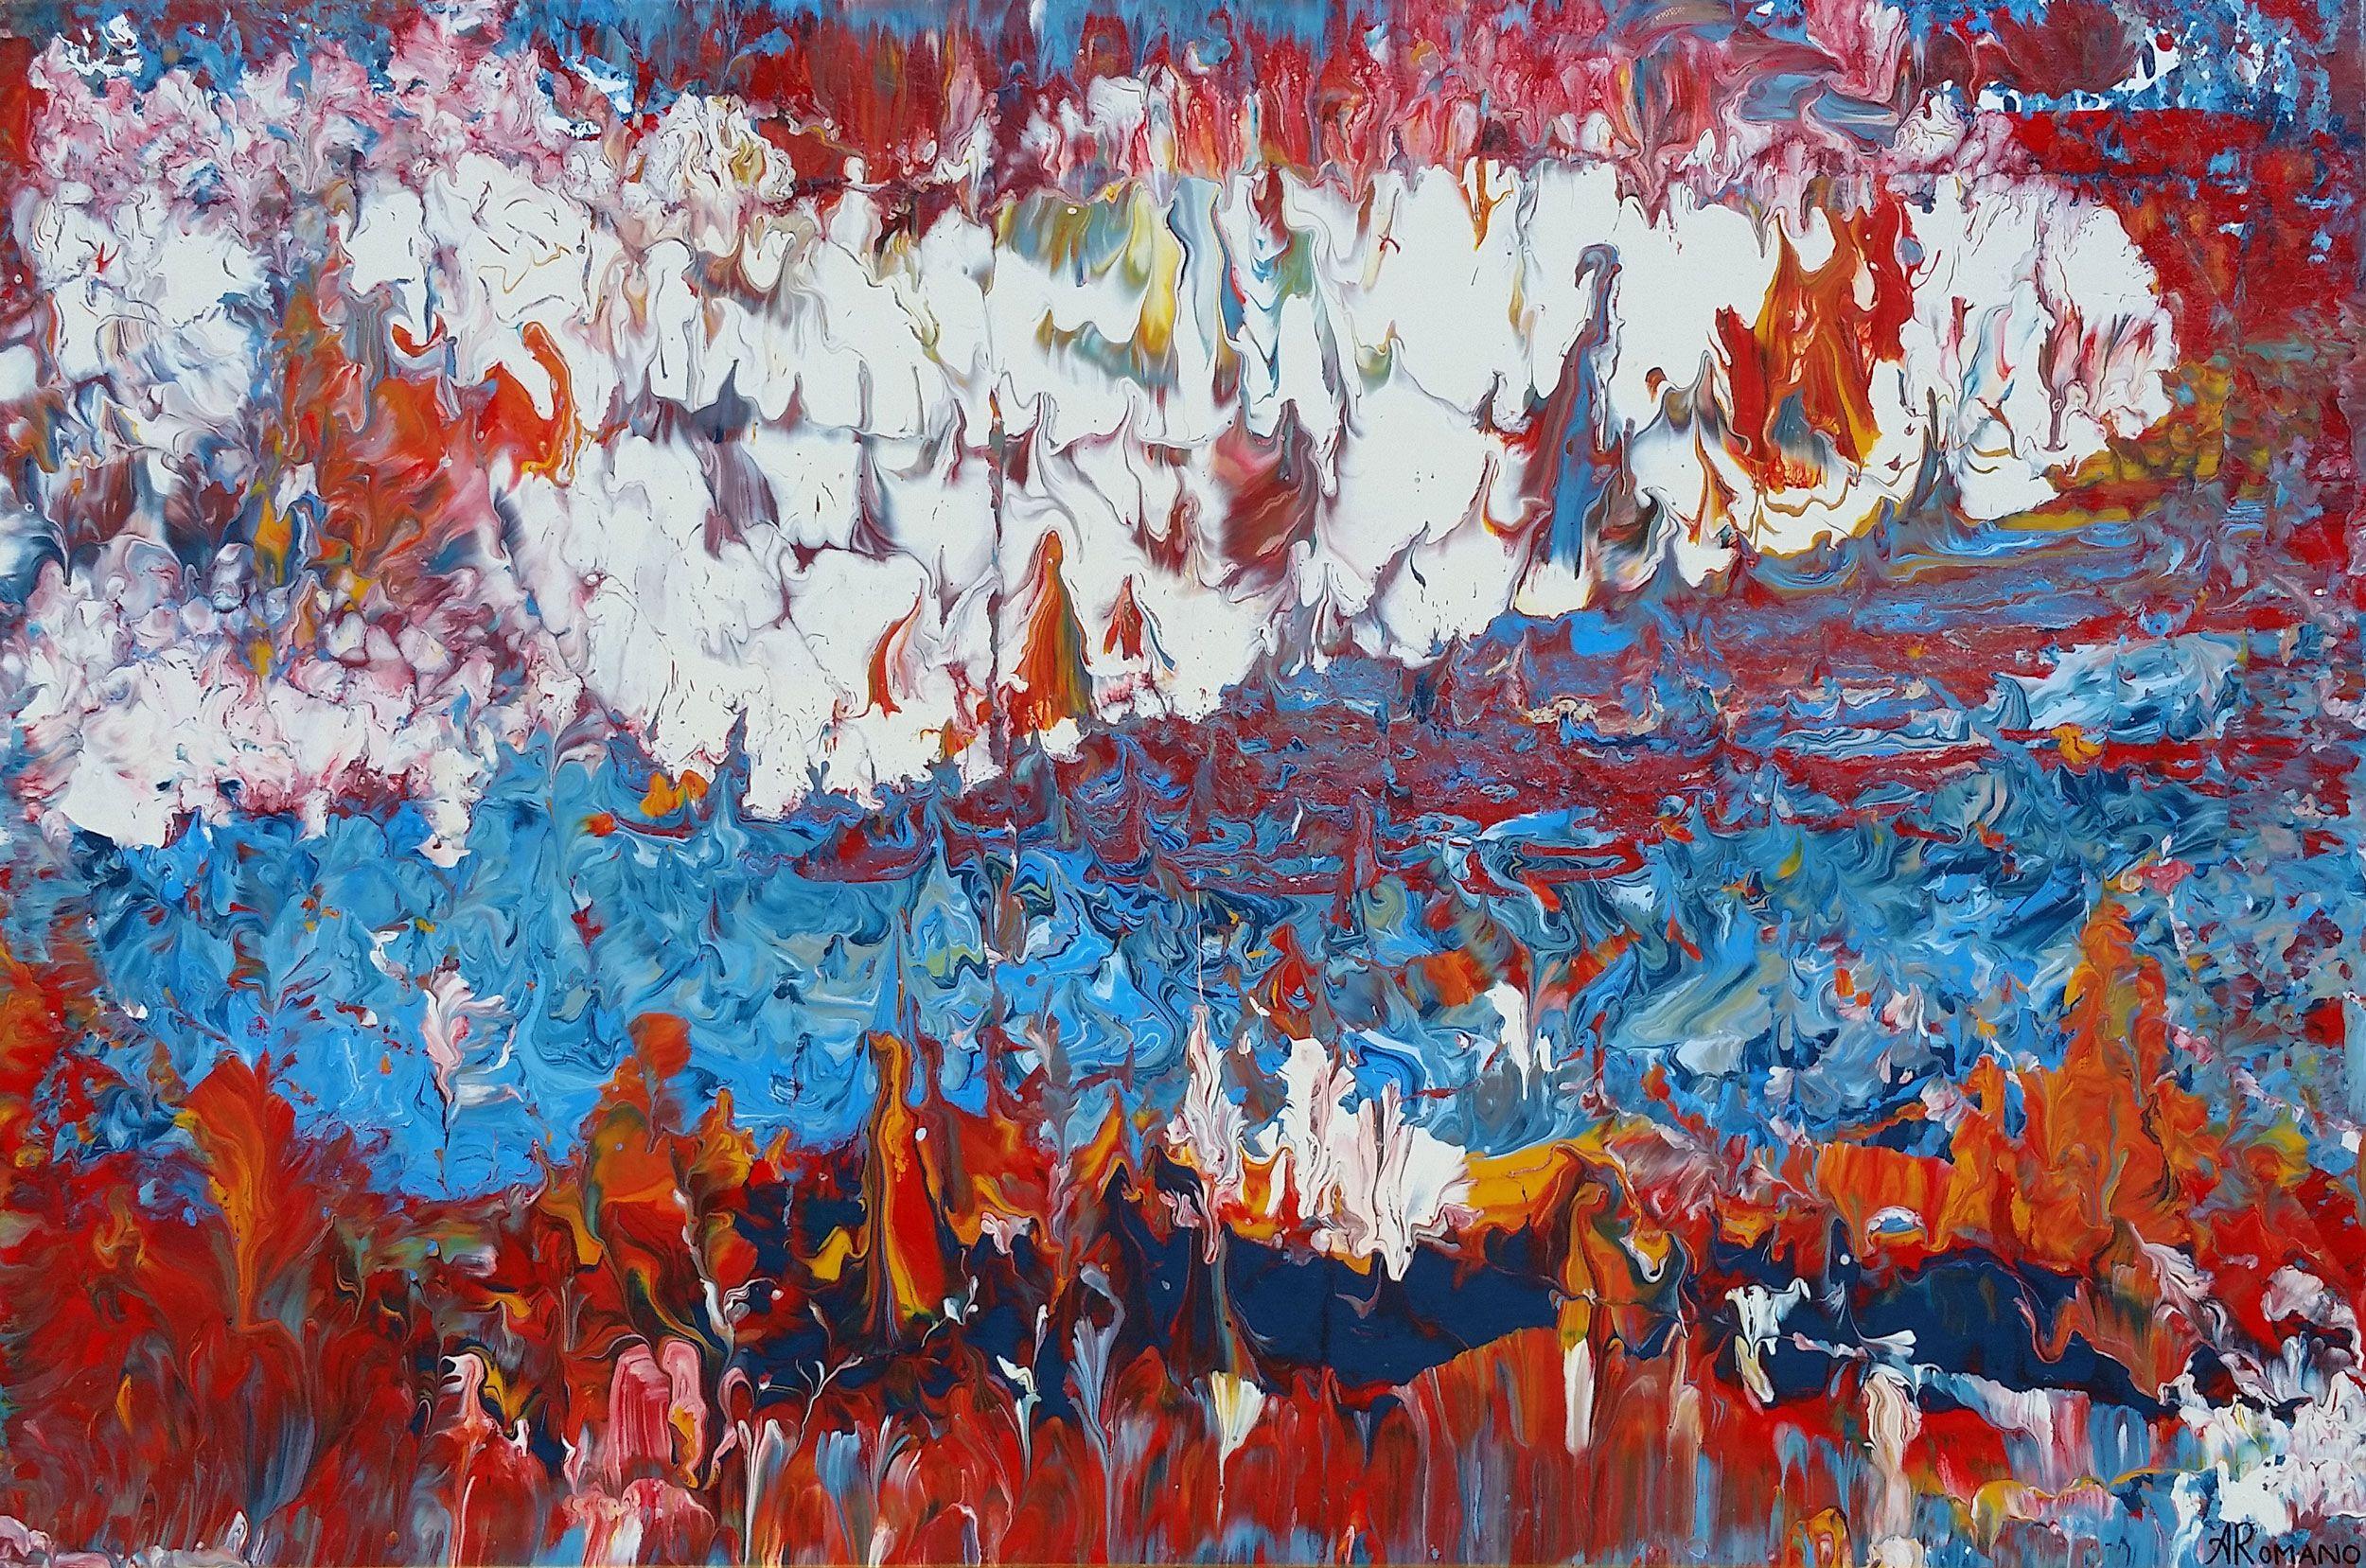 Alexandra Romano Abstract Painting - Wilderness  36 x 24 IN, Painting, Acrylic on Canvas